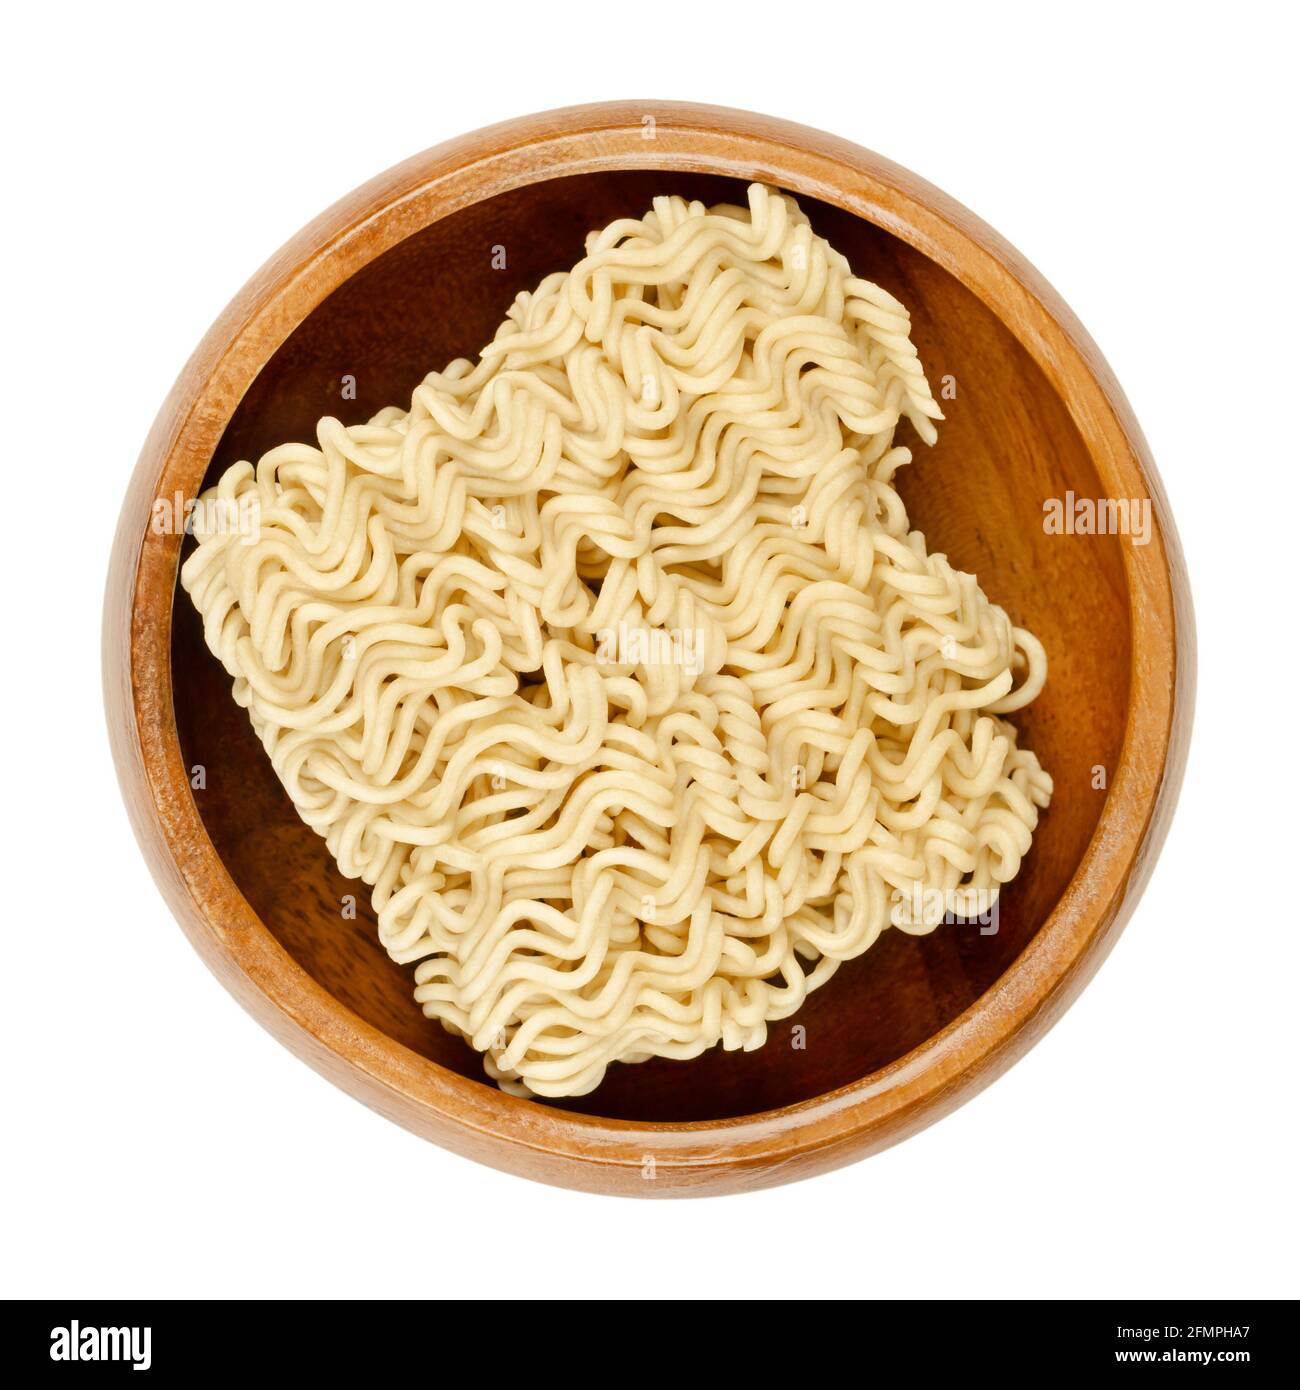 Dried instant noodles in a wooden bowl. Instant ramen are noodles sold in precooked and dried block form,  to be soaked in boiling water. Stock Photo